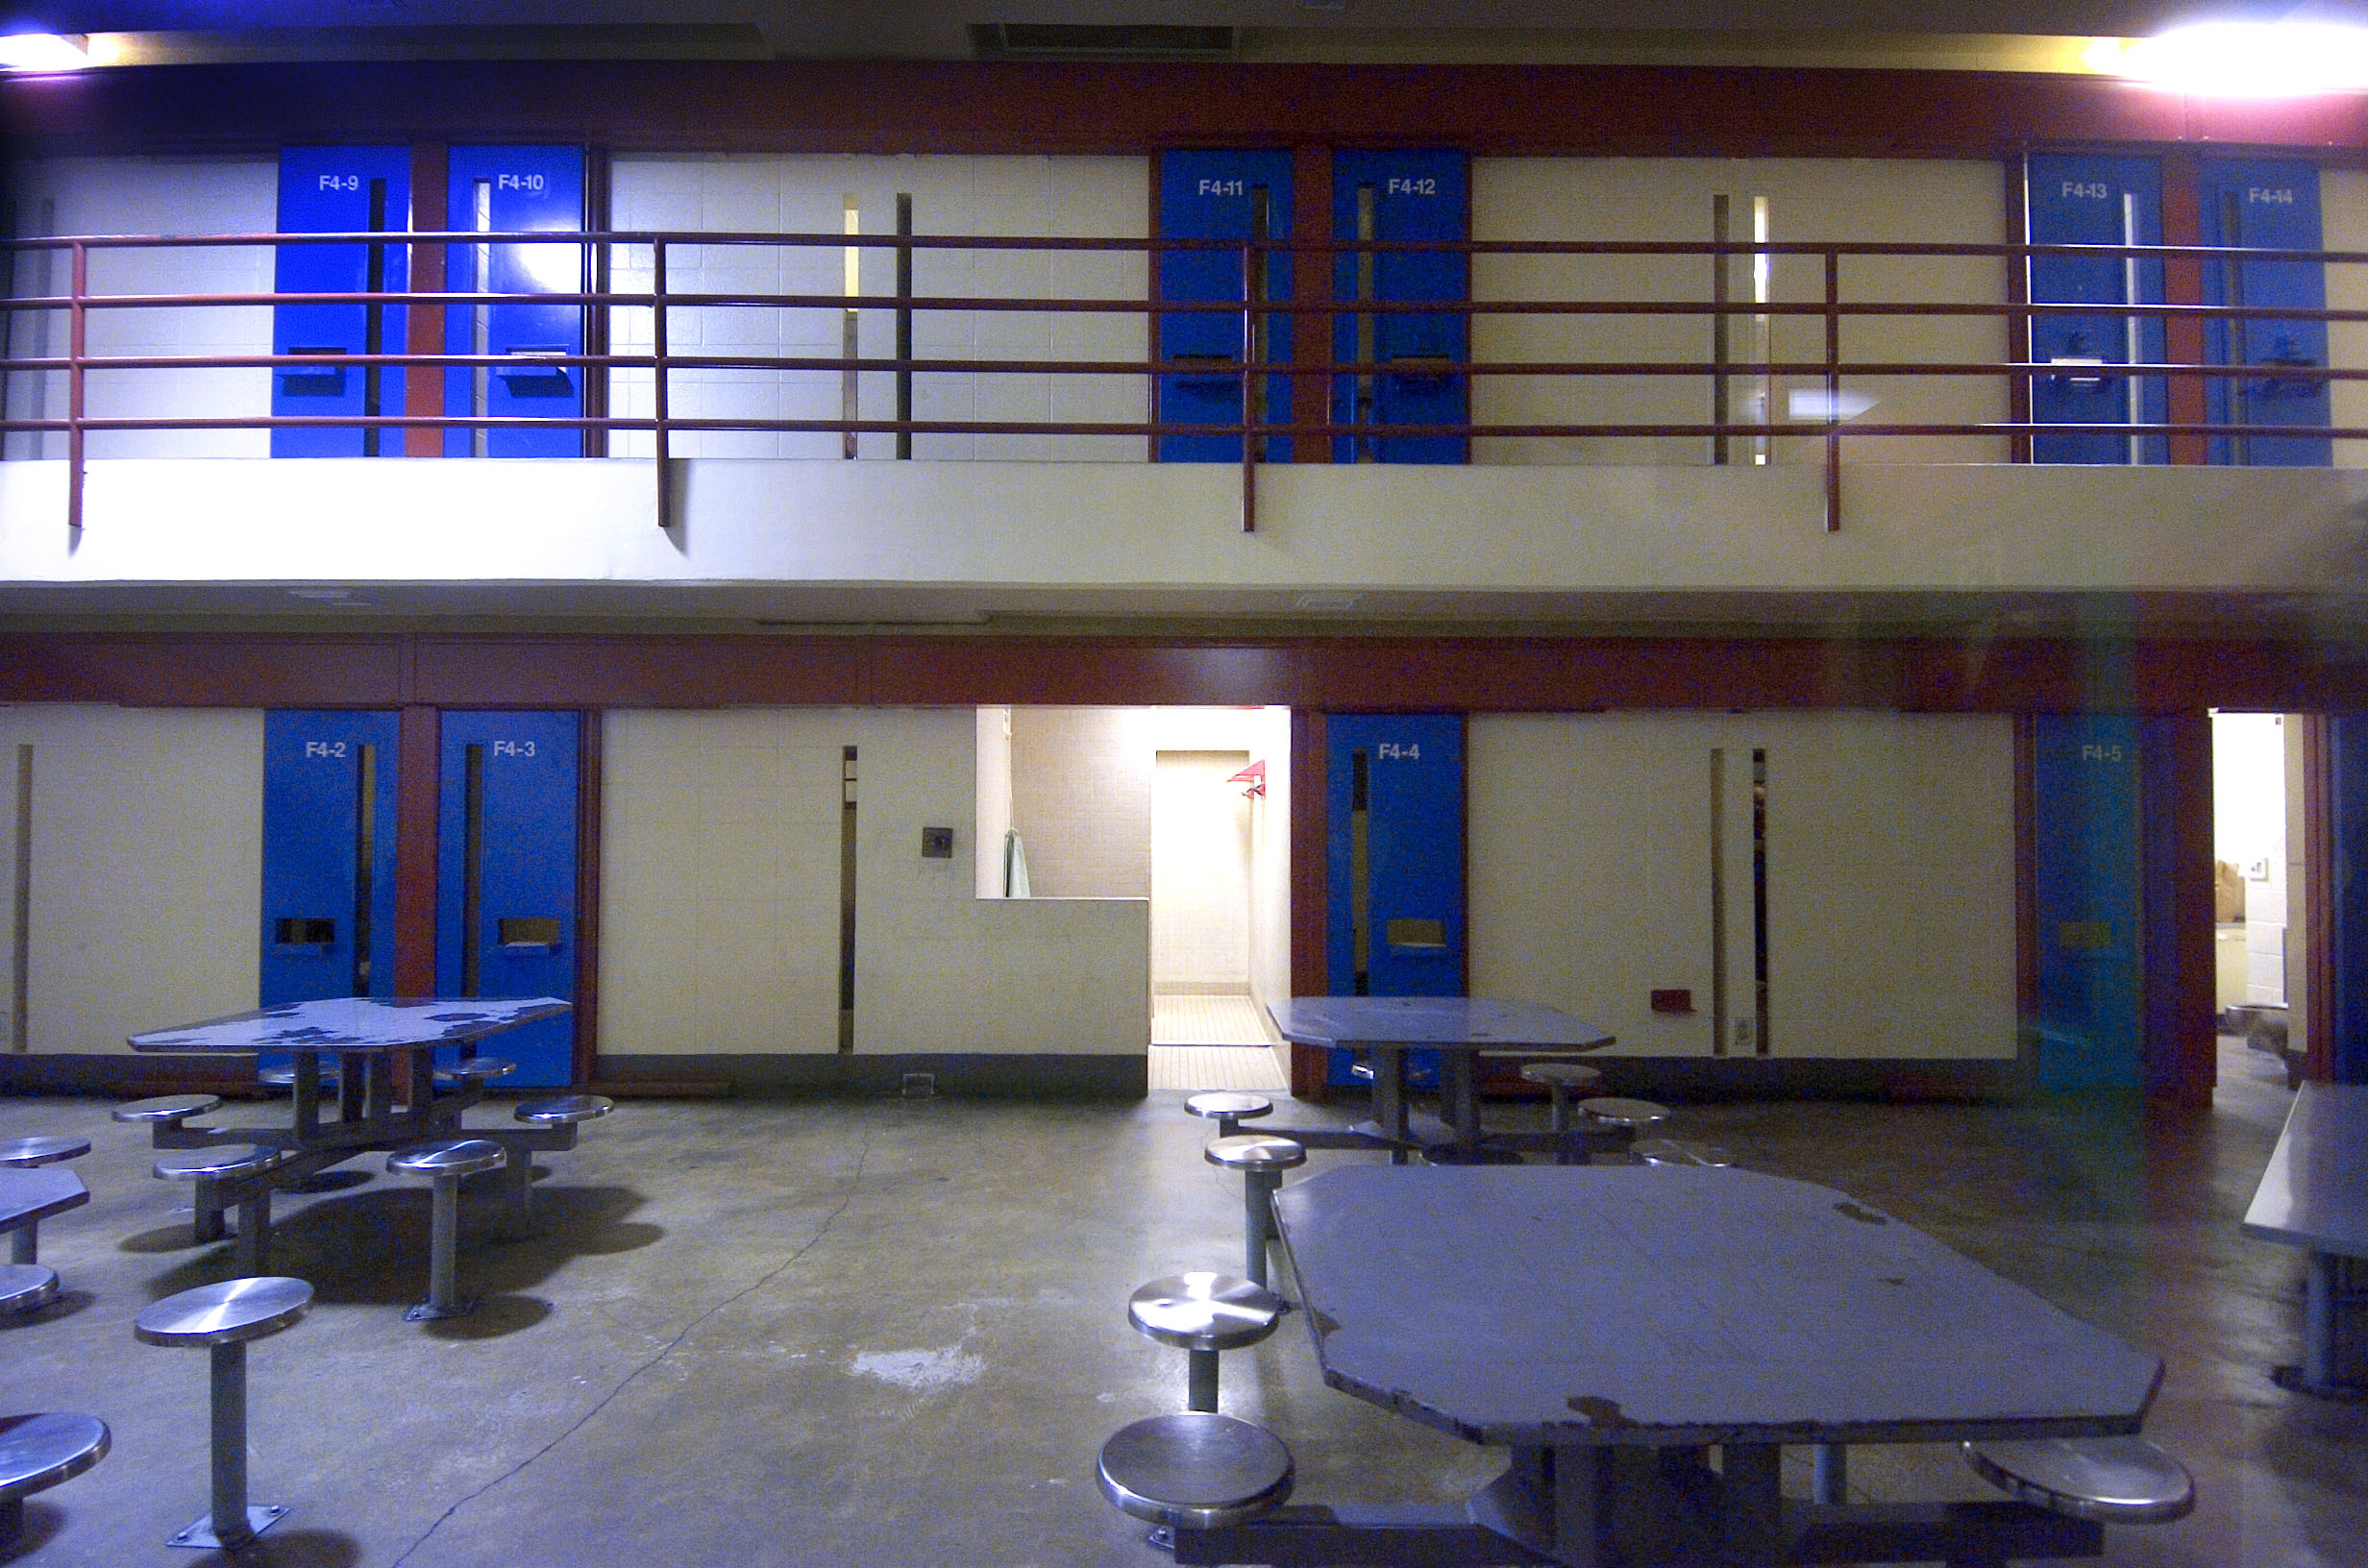 An interior view of one of the pods at the Clark County Jail.